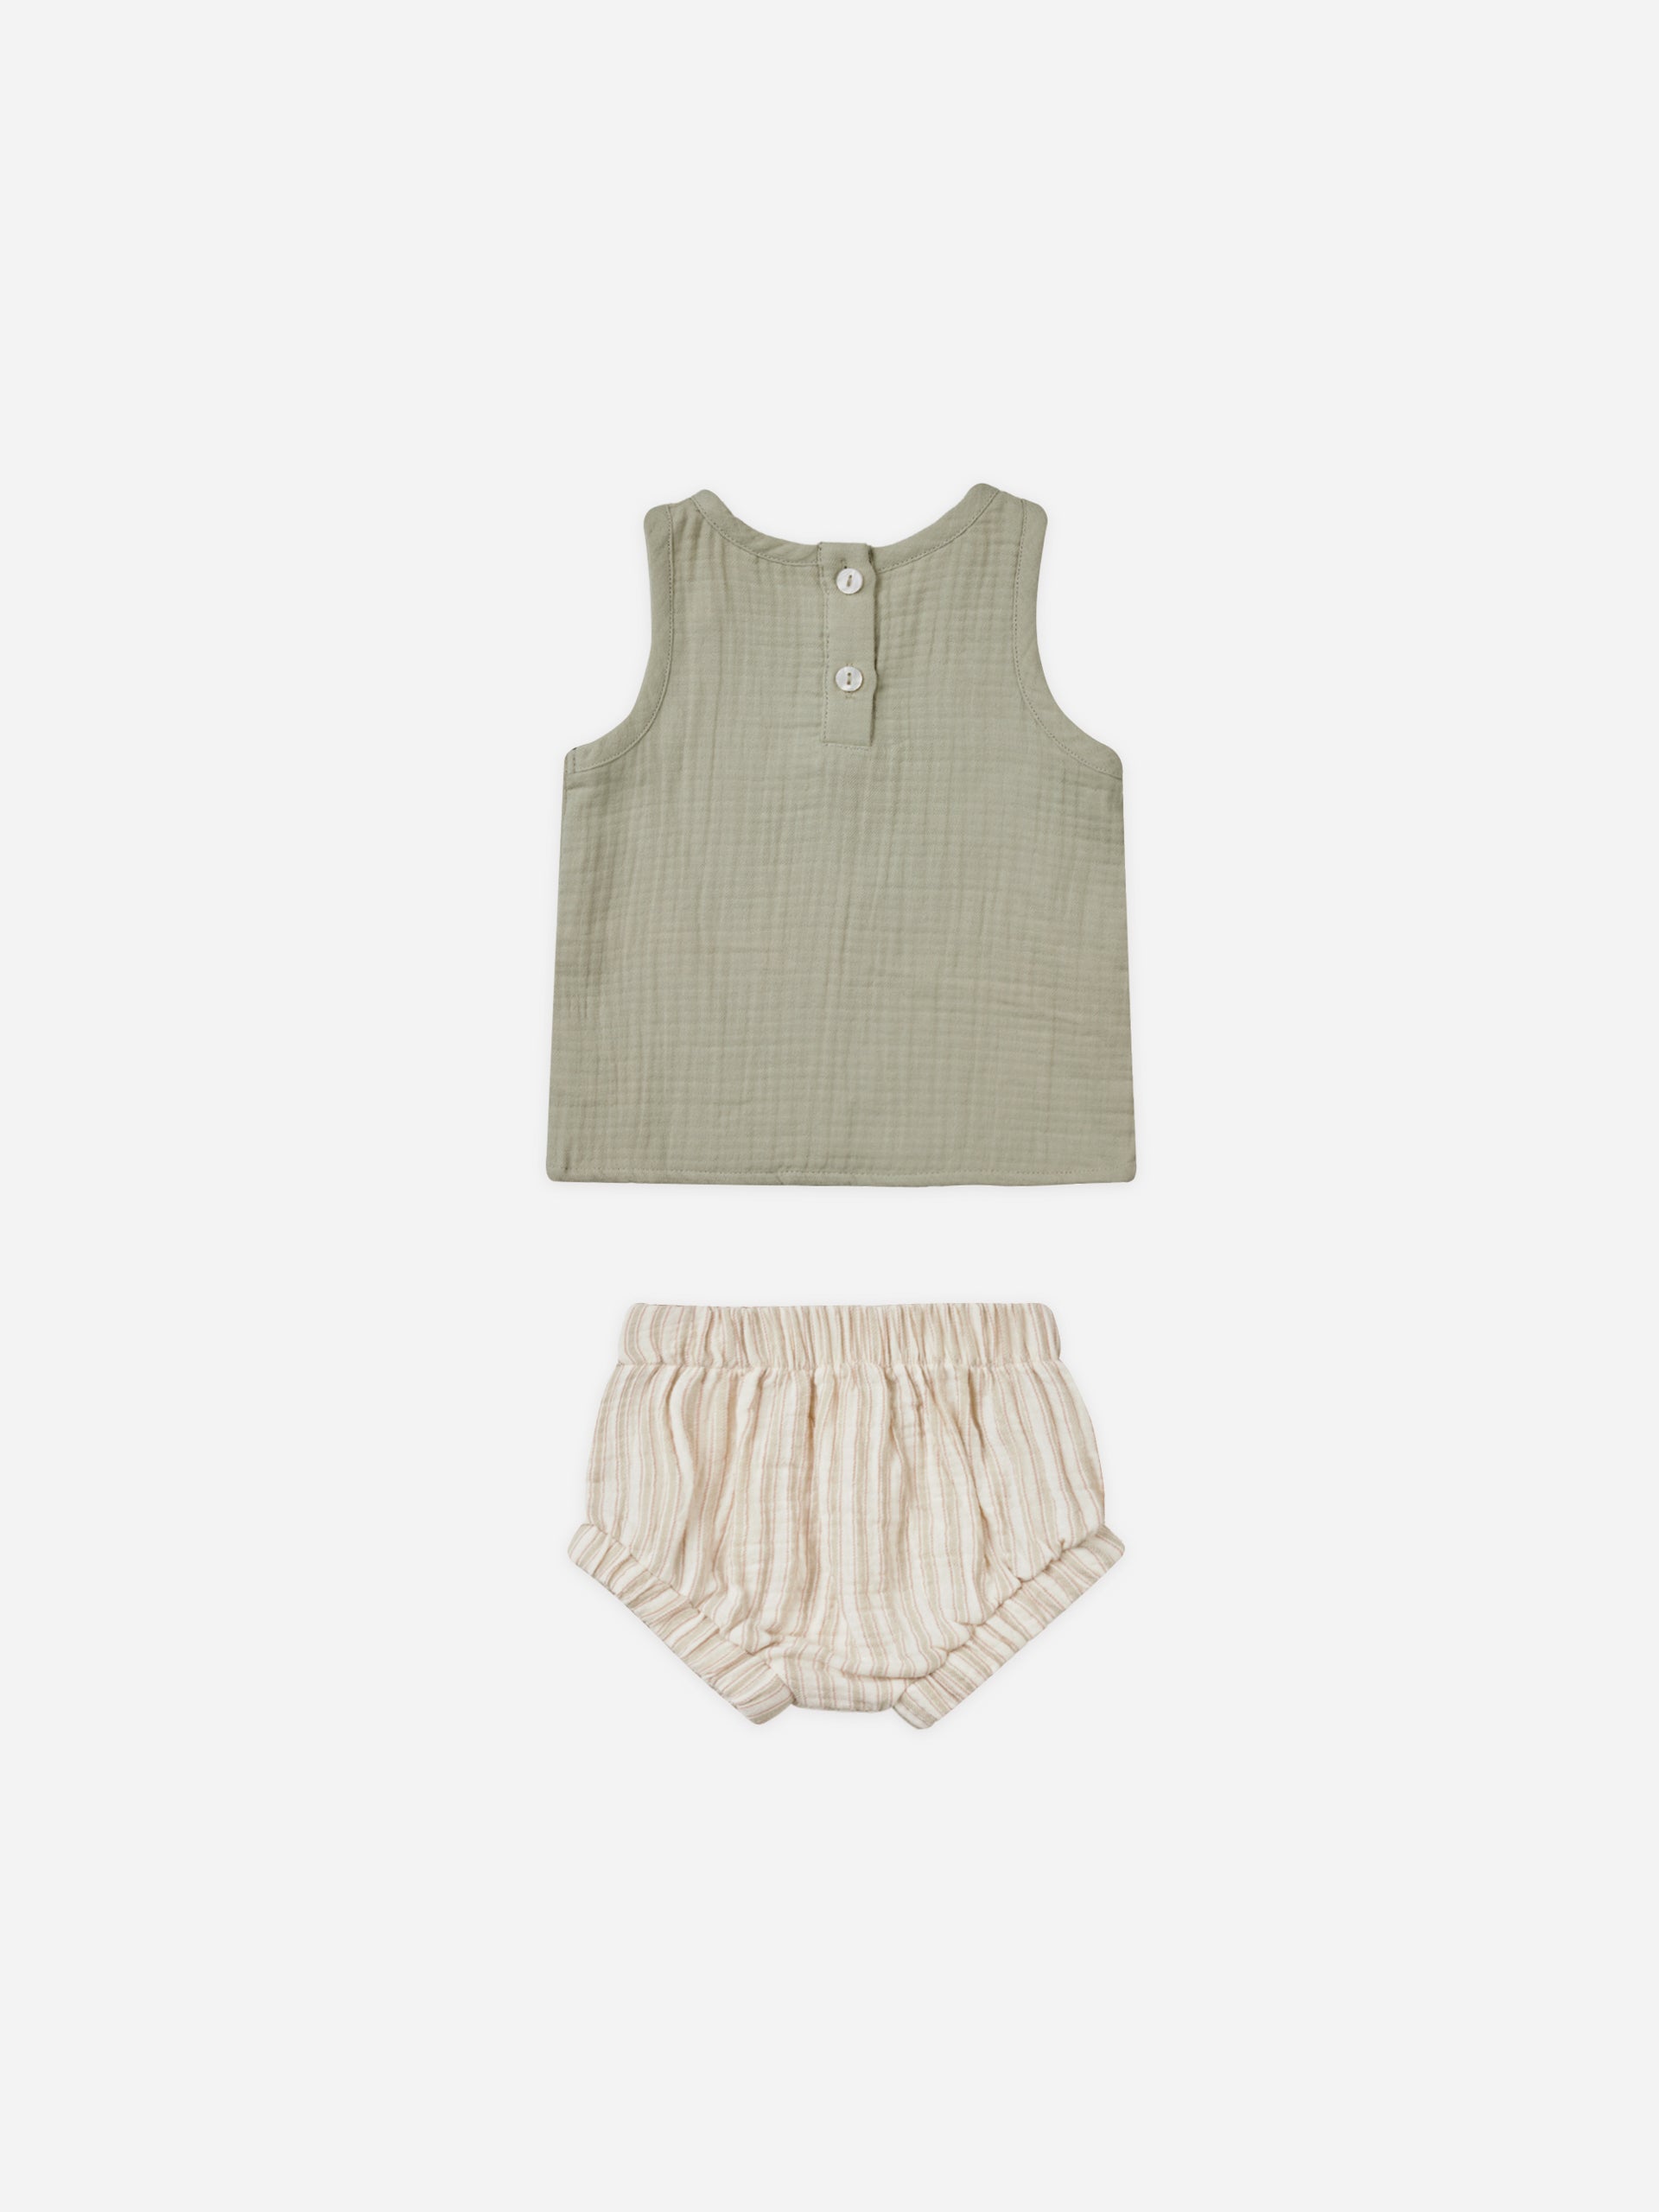 Woven Tank + Short Set || Sage Stripe - Rylee + Cru | Kids Clothes | Trendy Baby Clothes | Modern Infant Outfits |